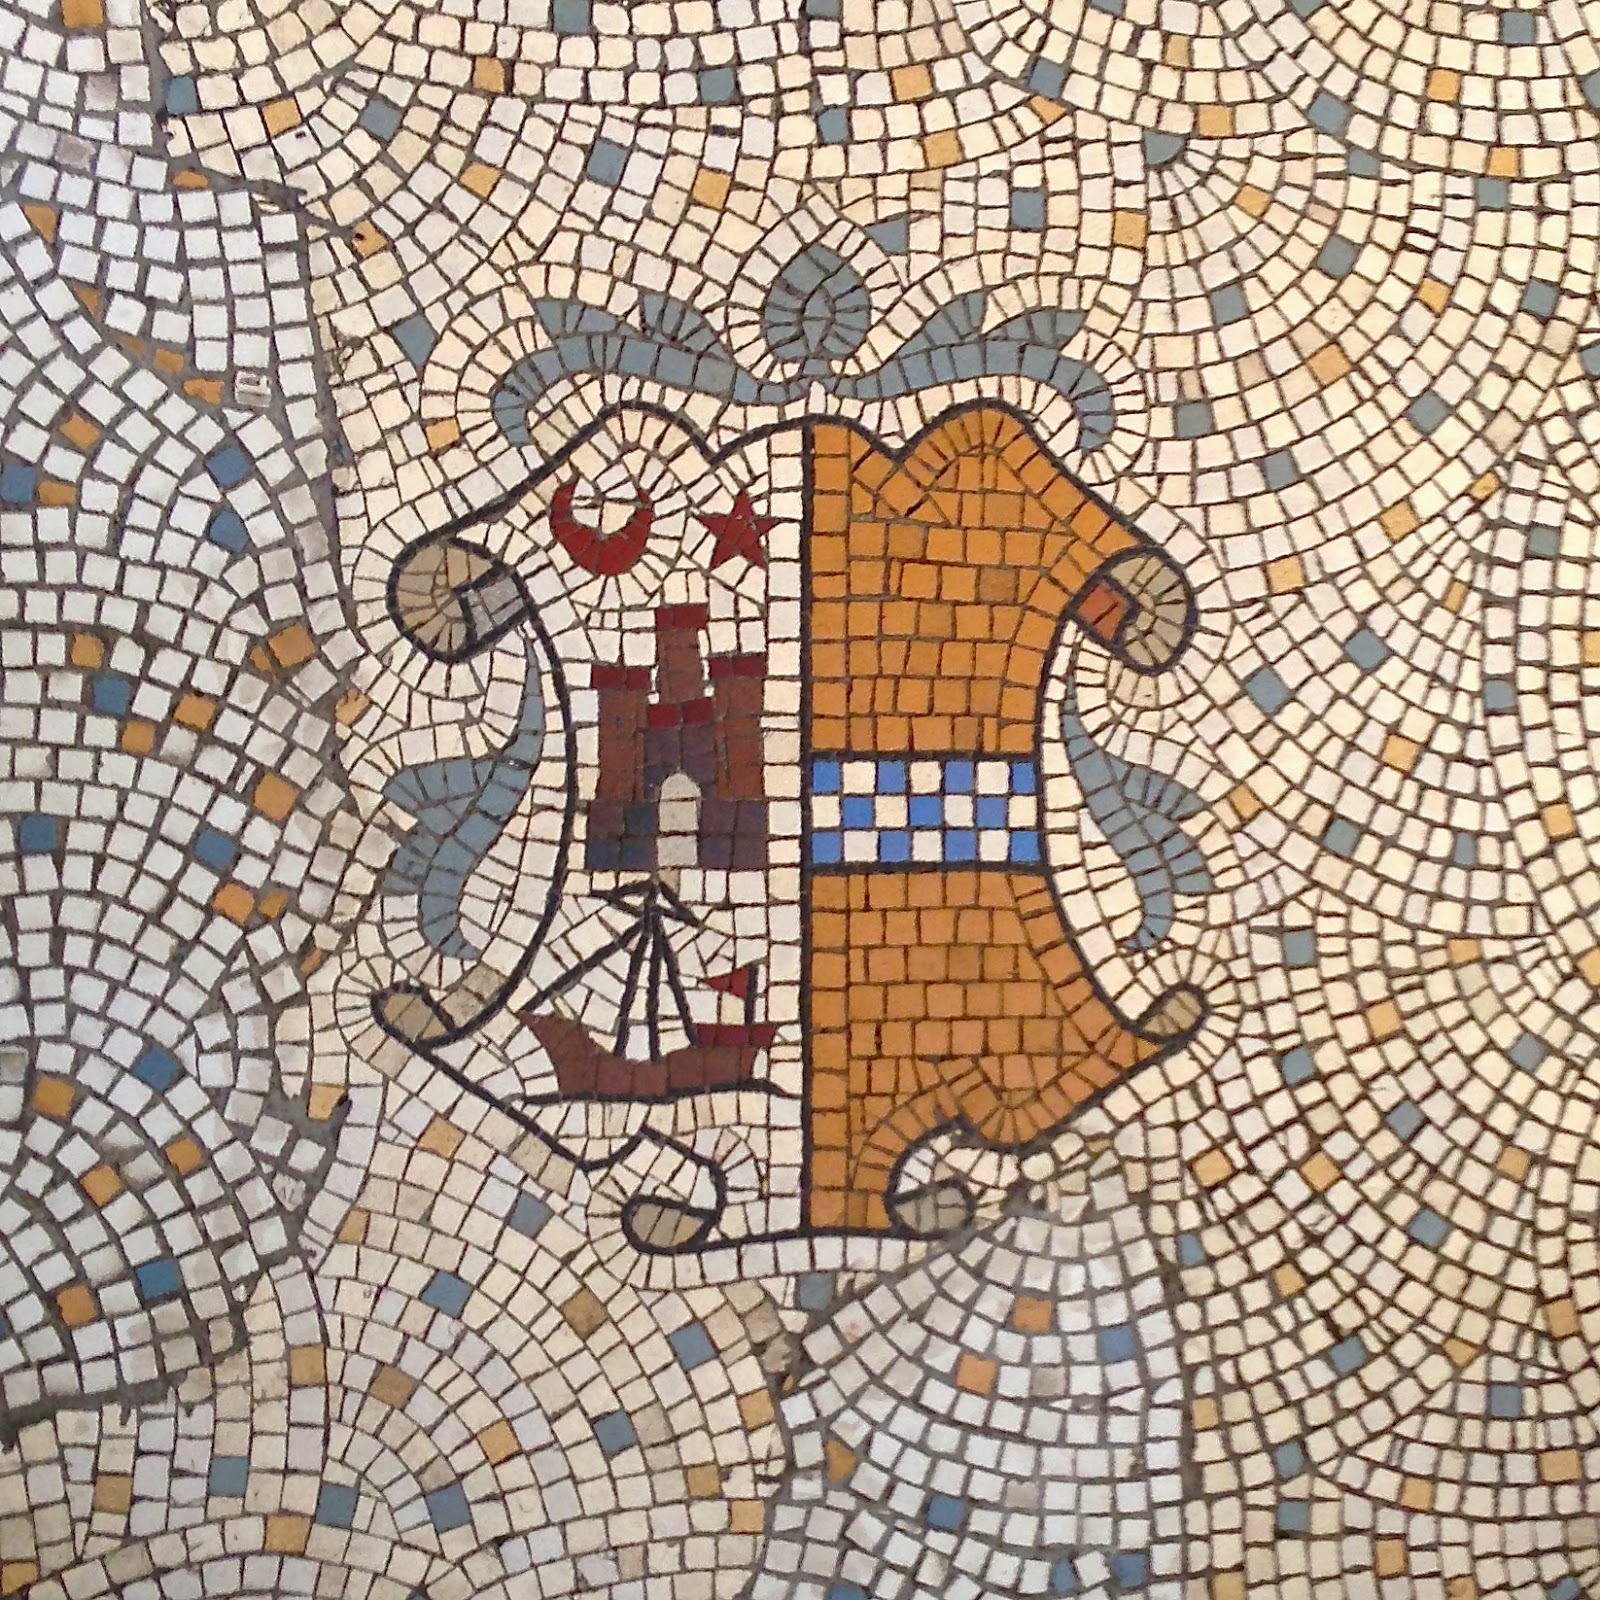 Crest of the royal burgh of Rothesay in the mosaic tile